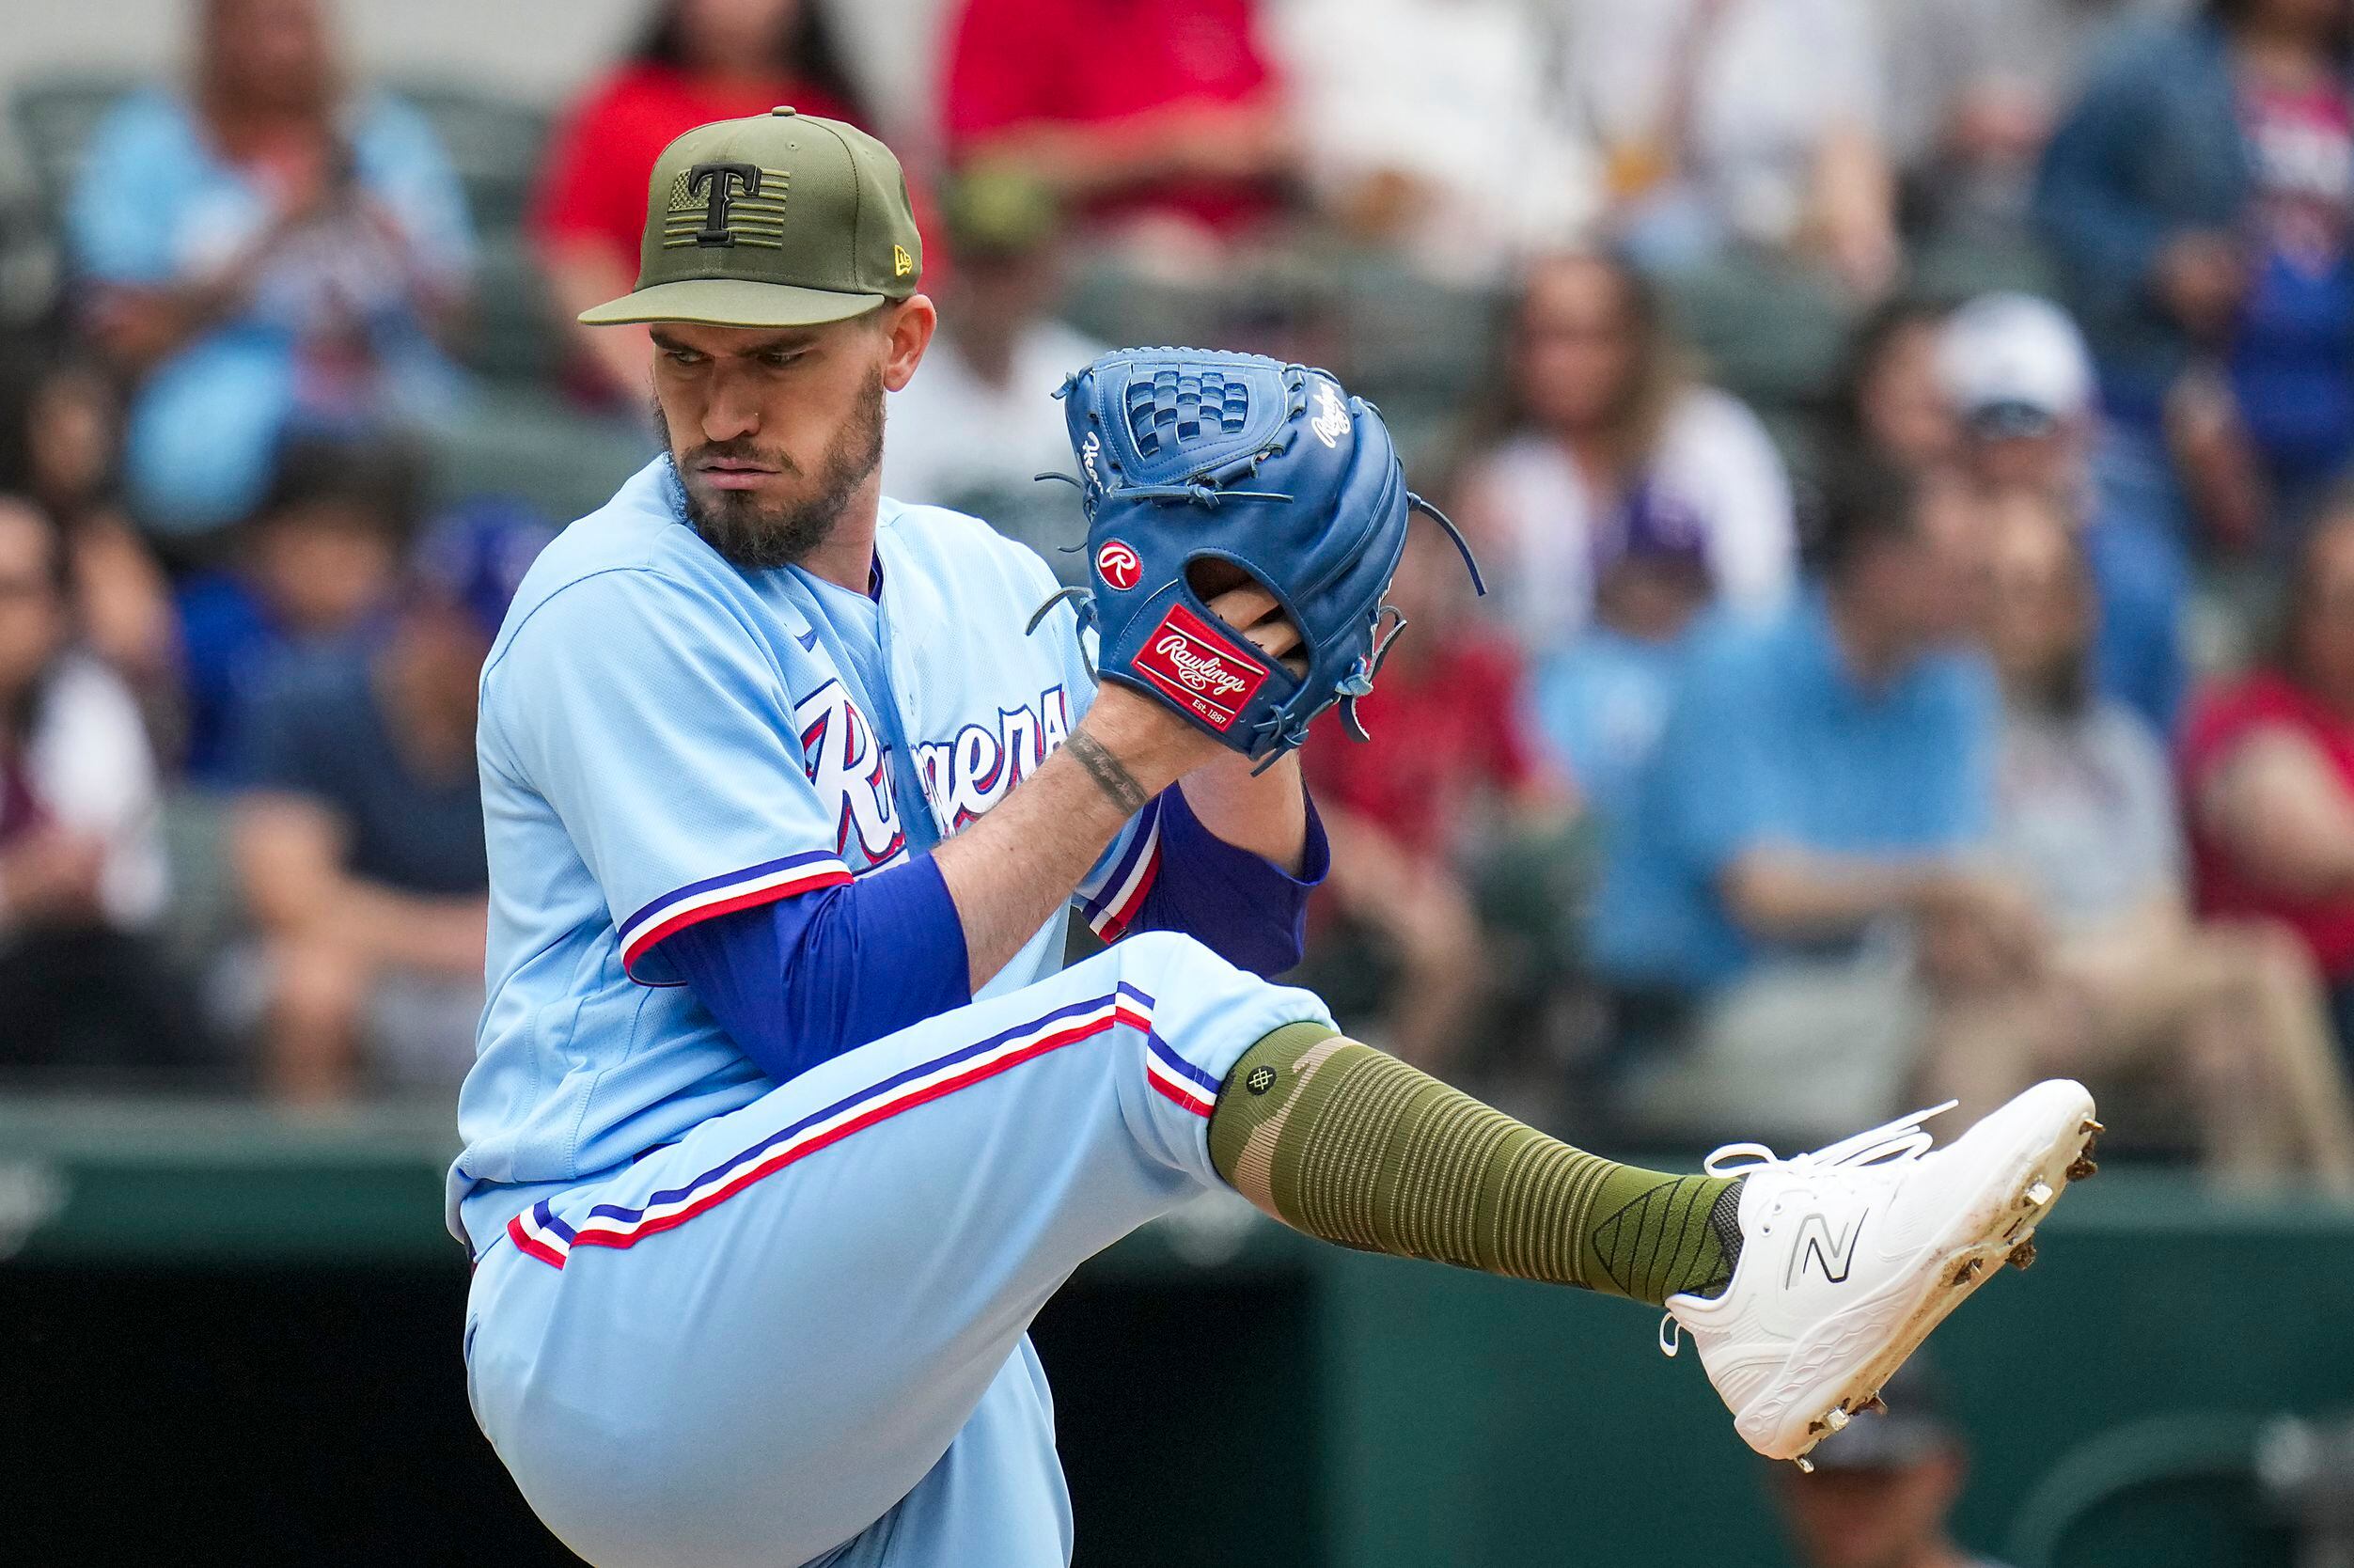 Photos: Rangers wrap up homestand with 13-3 blowout win over Rockies